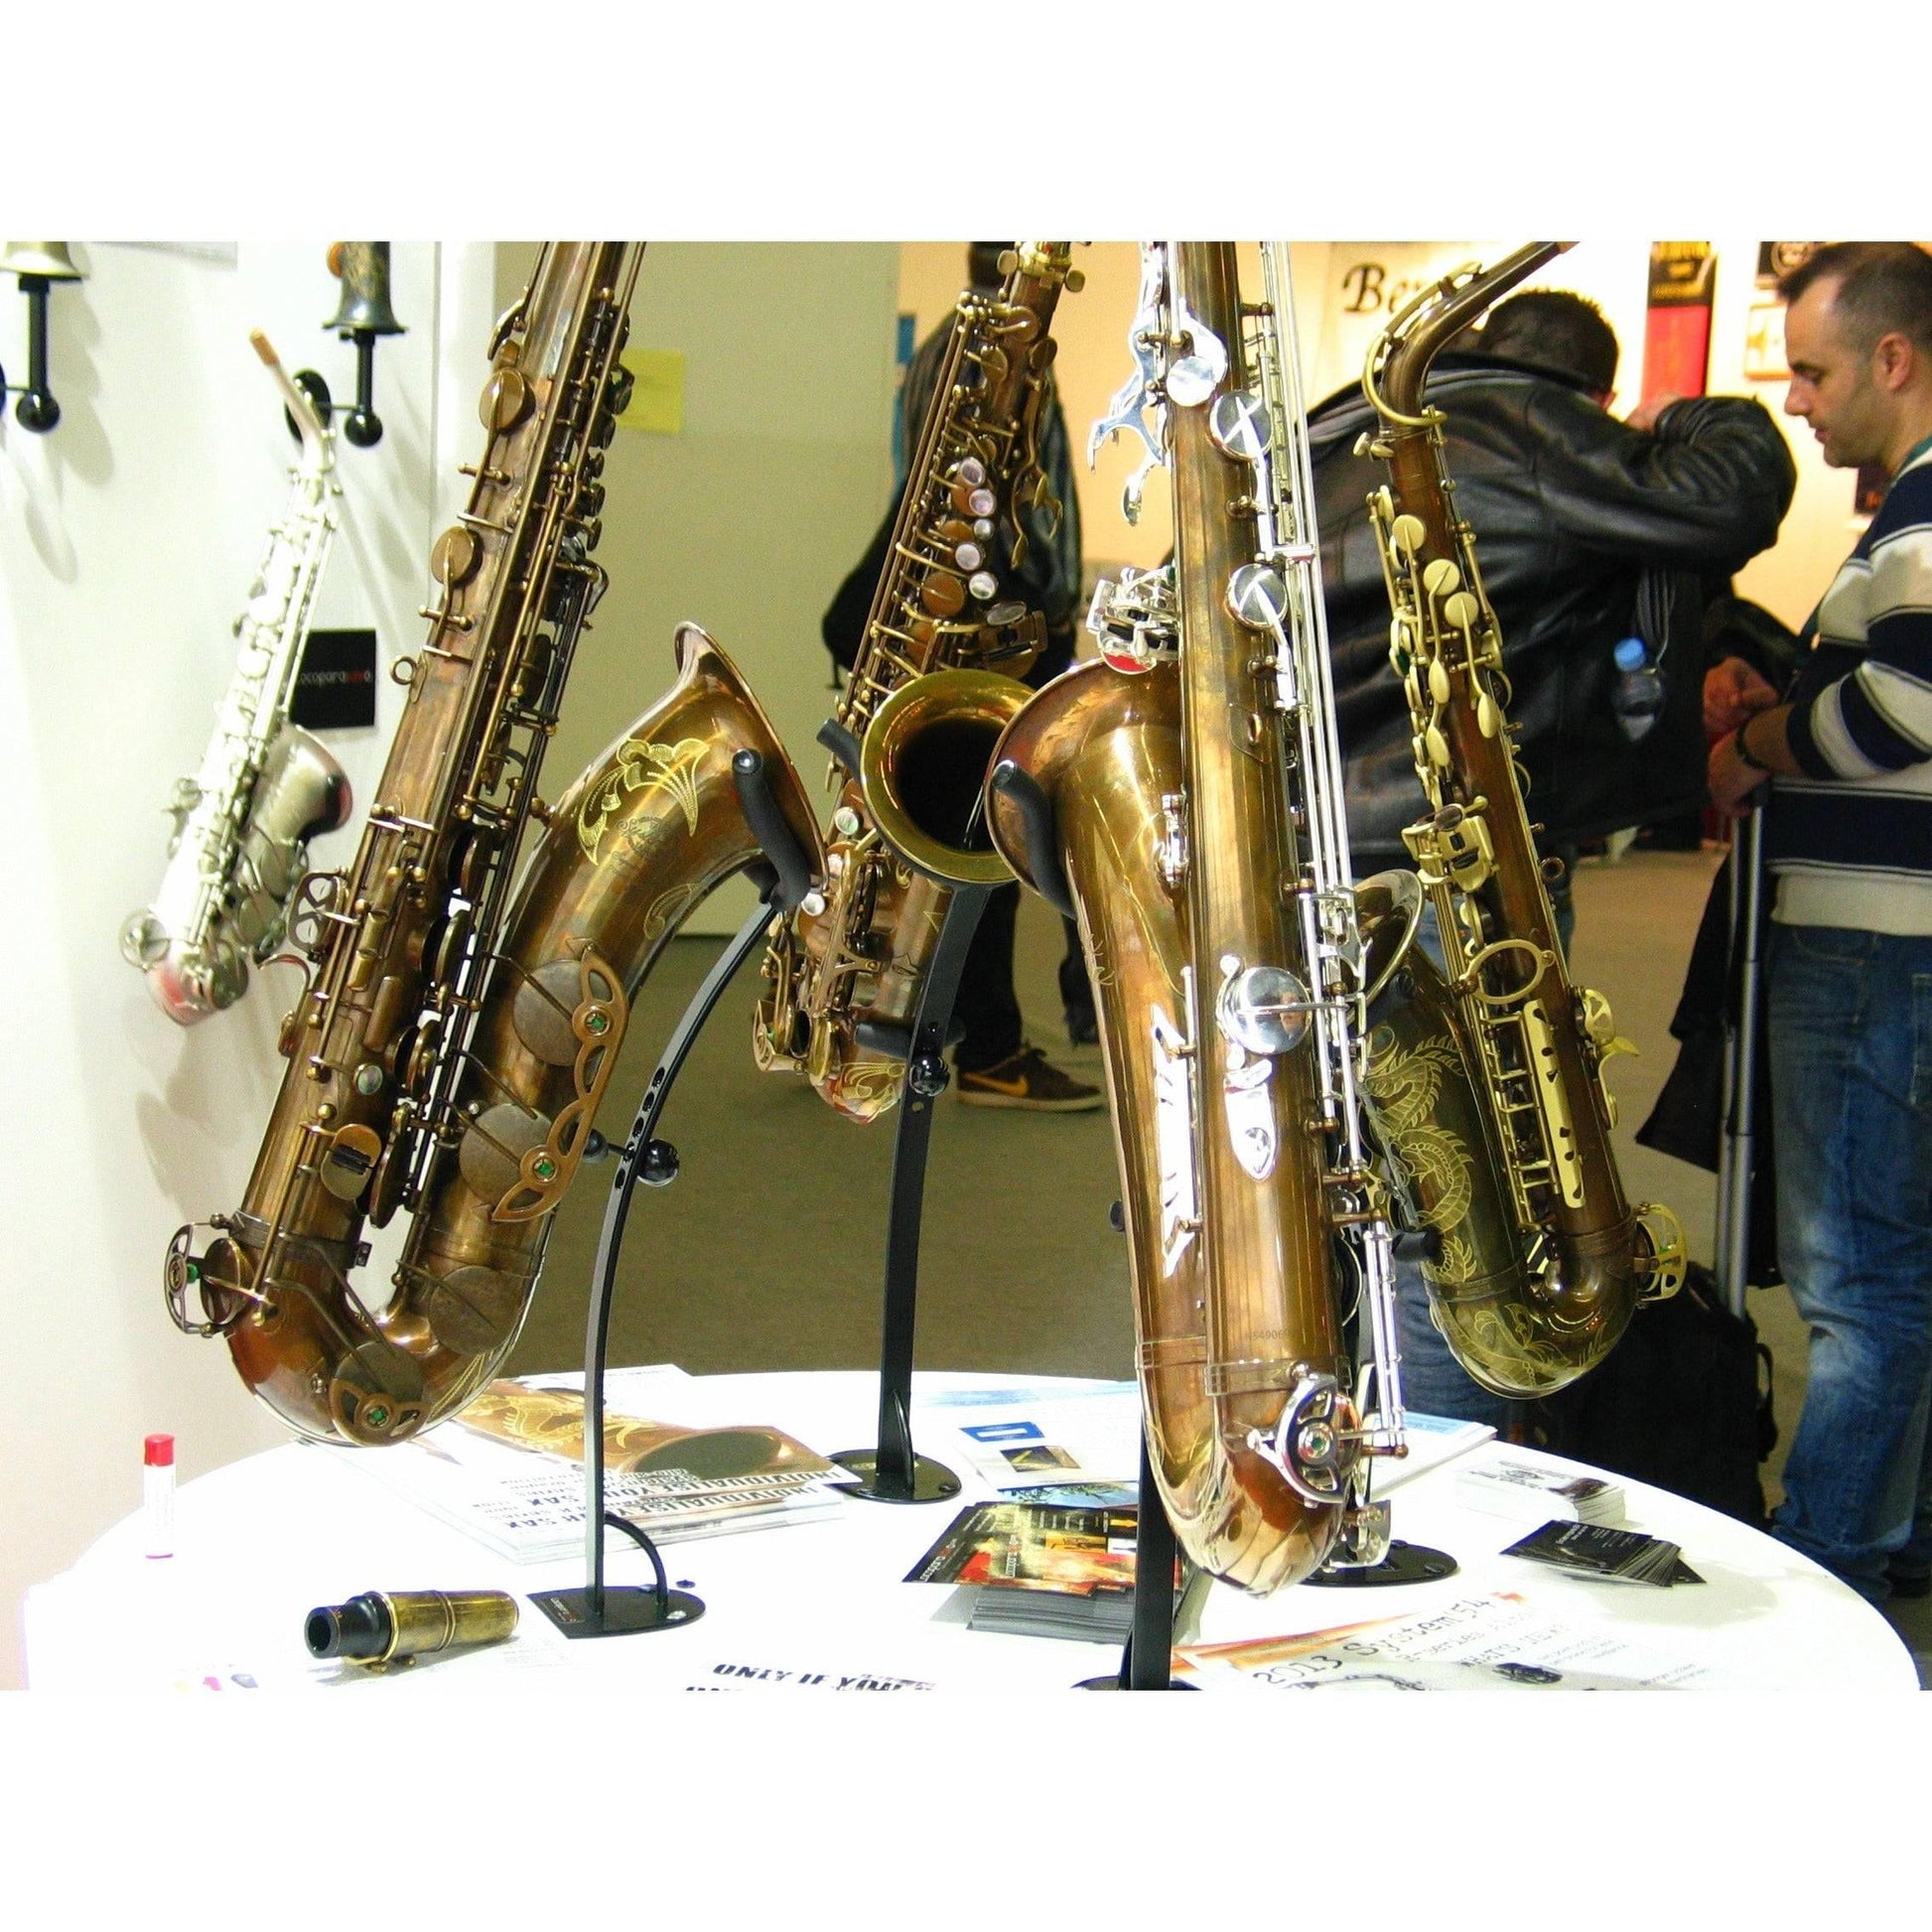 round centerpiece with 4 exhibit  desktop tenor saxophone stands with instruments on display for exhibits and playing rooms by Locoparasaxo